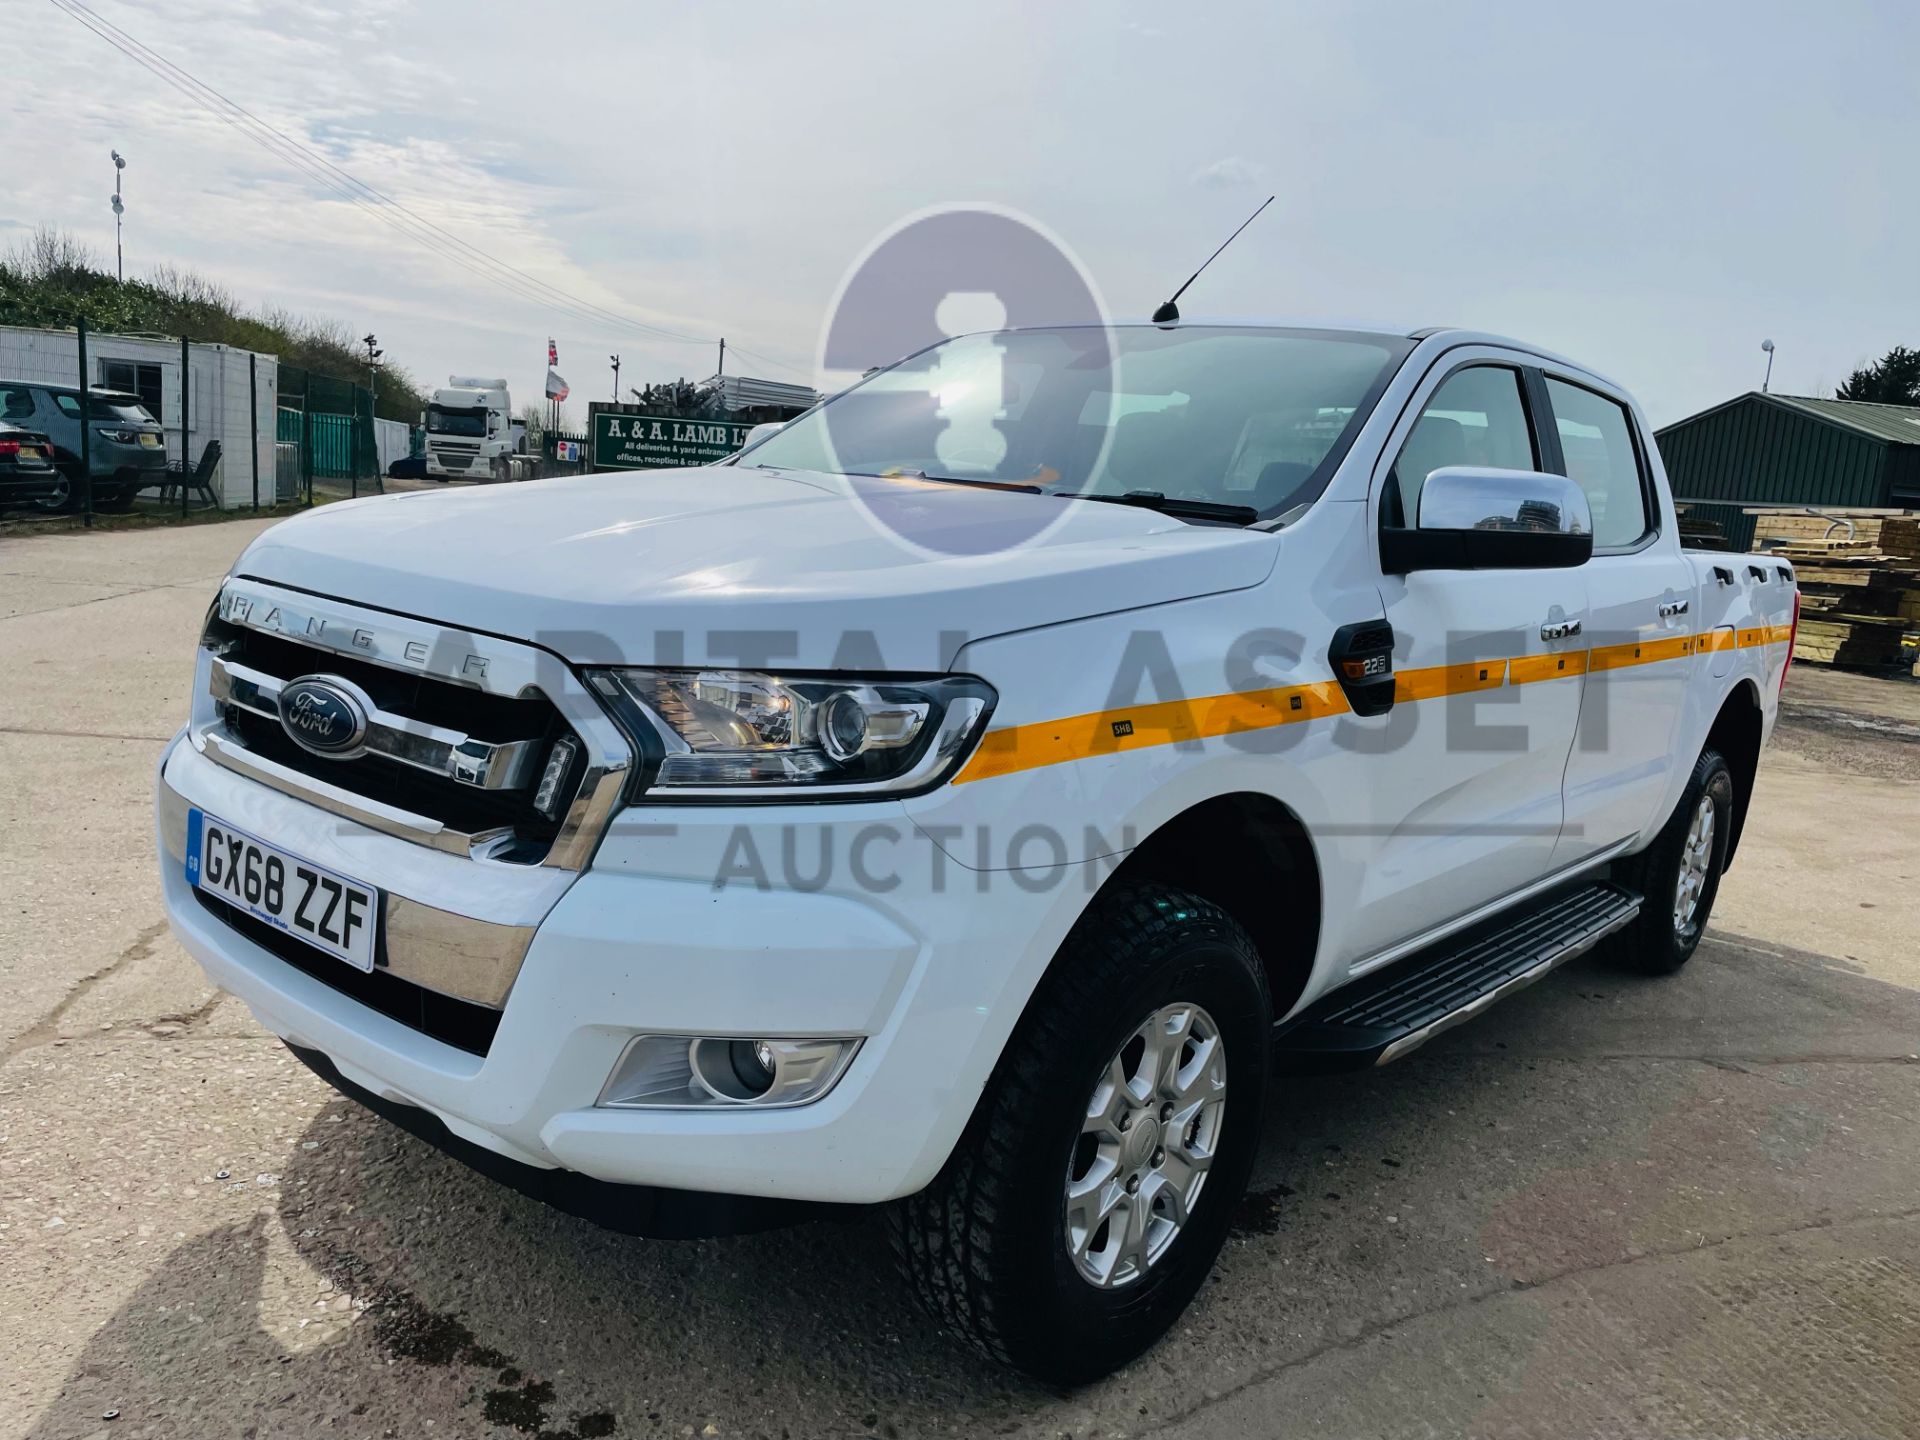 FORD RANGER *DOUBLE CAB PICK-UP* (2019 - EURO 6) 2.2 TDCI - 160 BHP (1 OWNER) *U-LEZ COMPLIANT* - Image 5 of 47